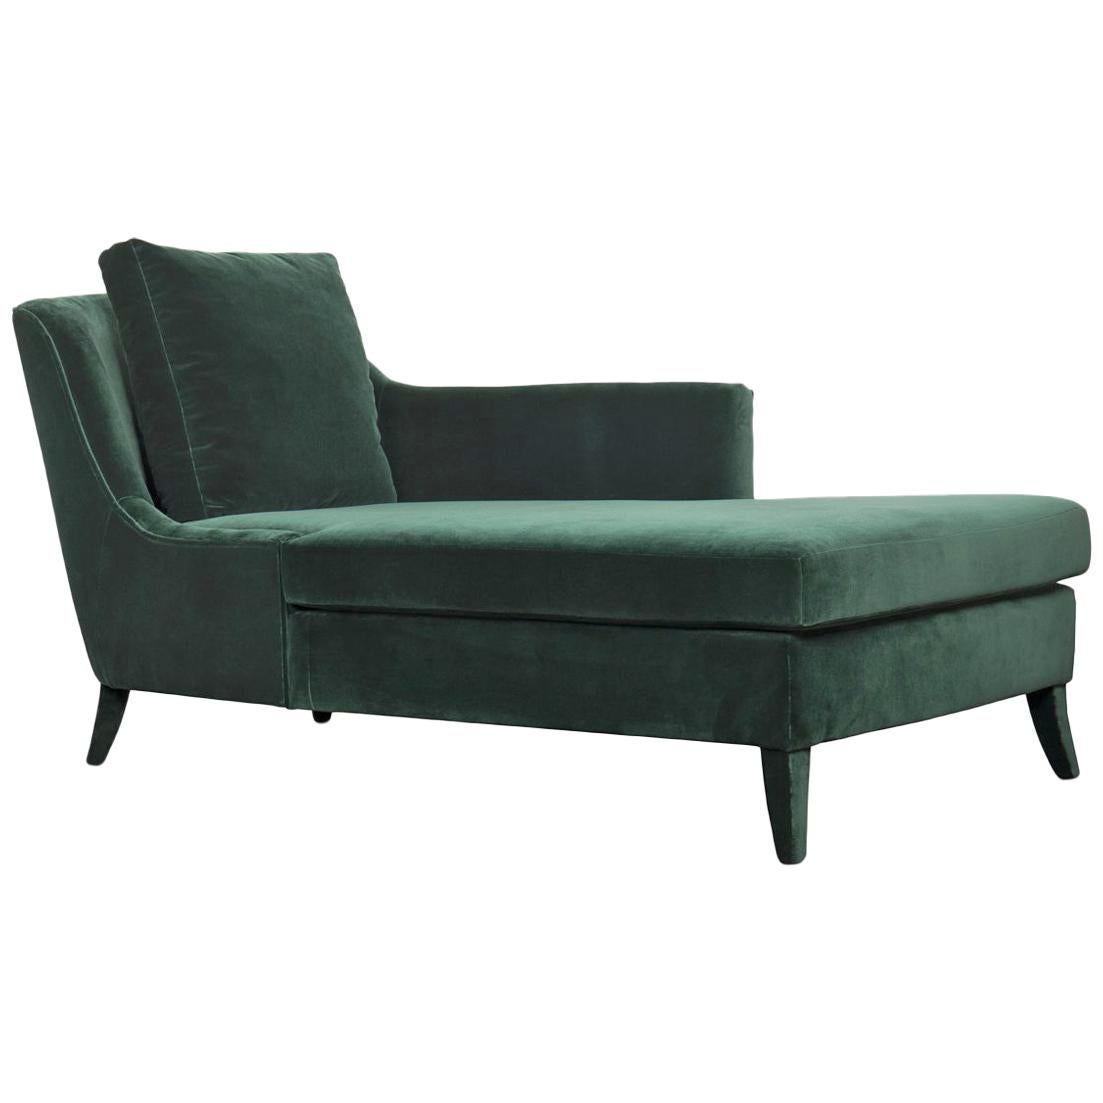 British Green Long Chair Covered with Velvet For Sale